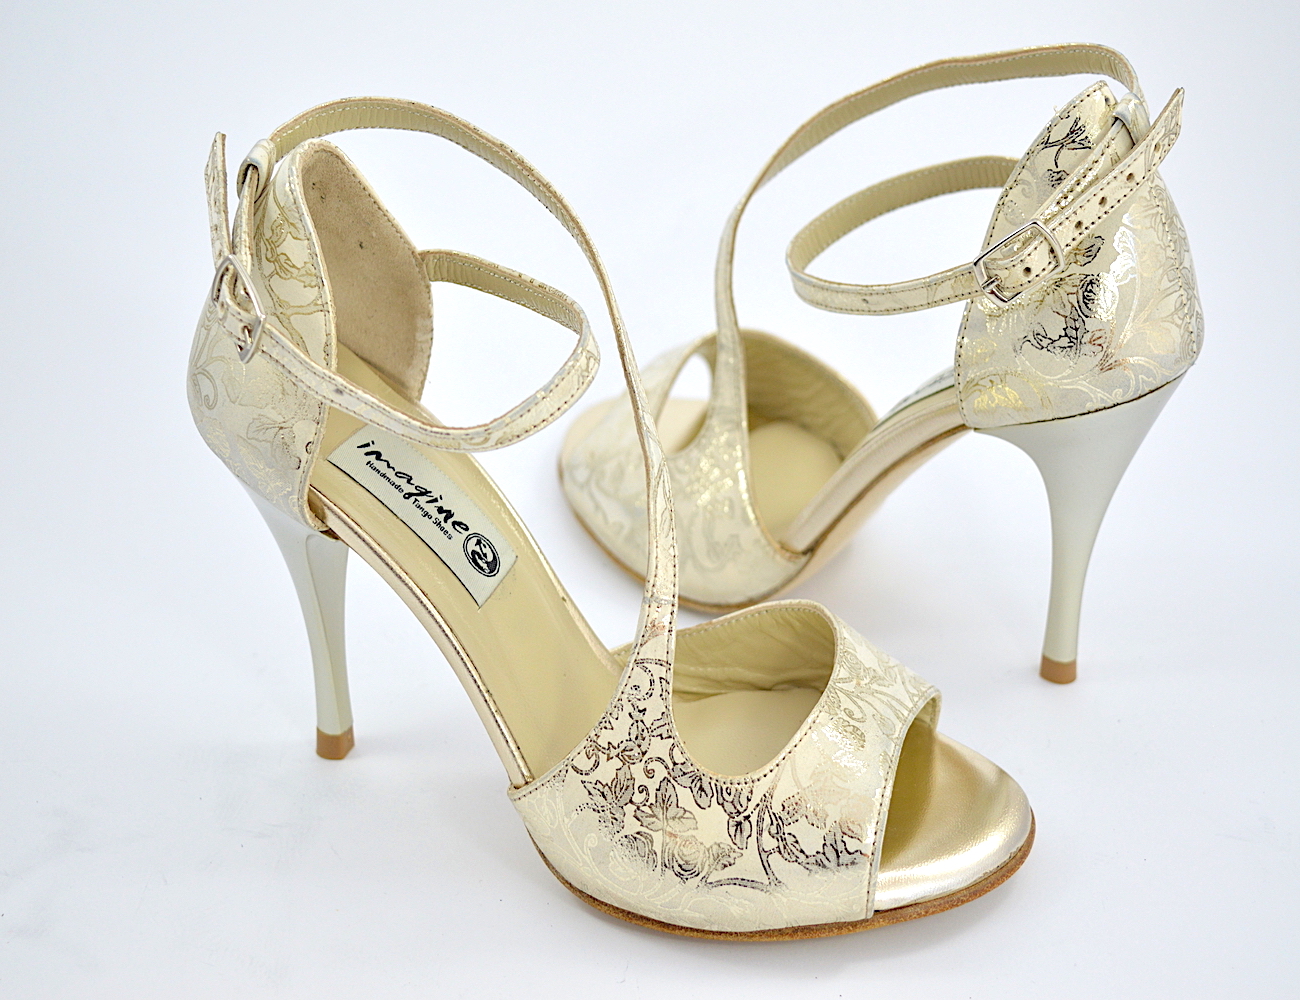 Women's Argentine Tango dance Shoes, open toe in beige suede leather with gold floral paisley prints